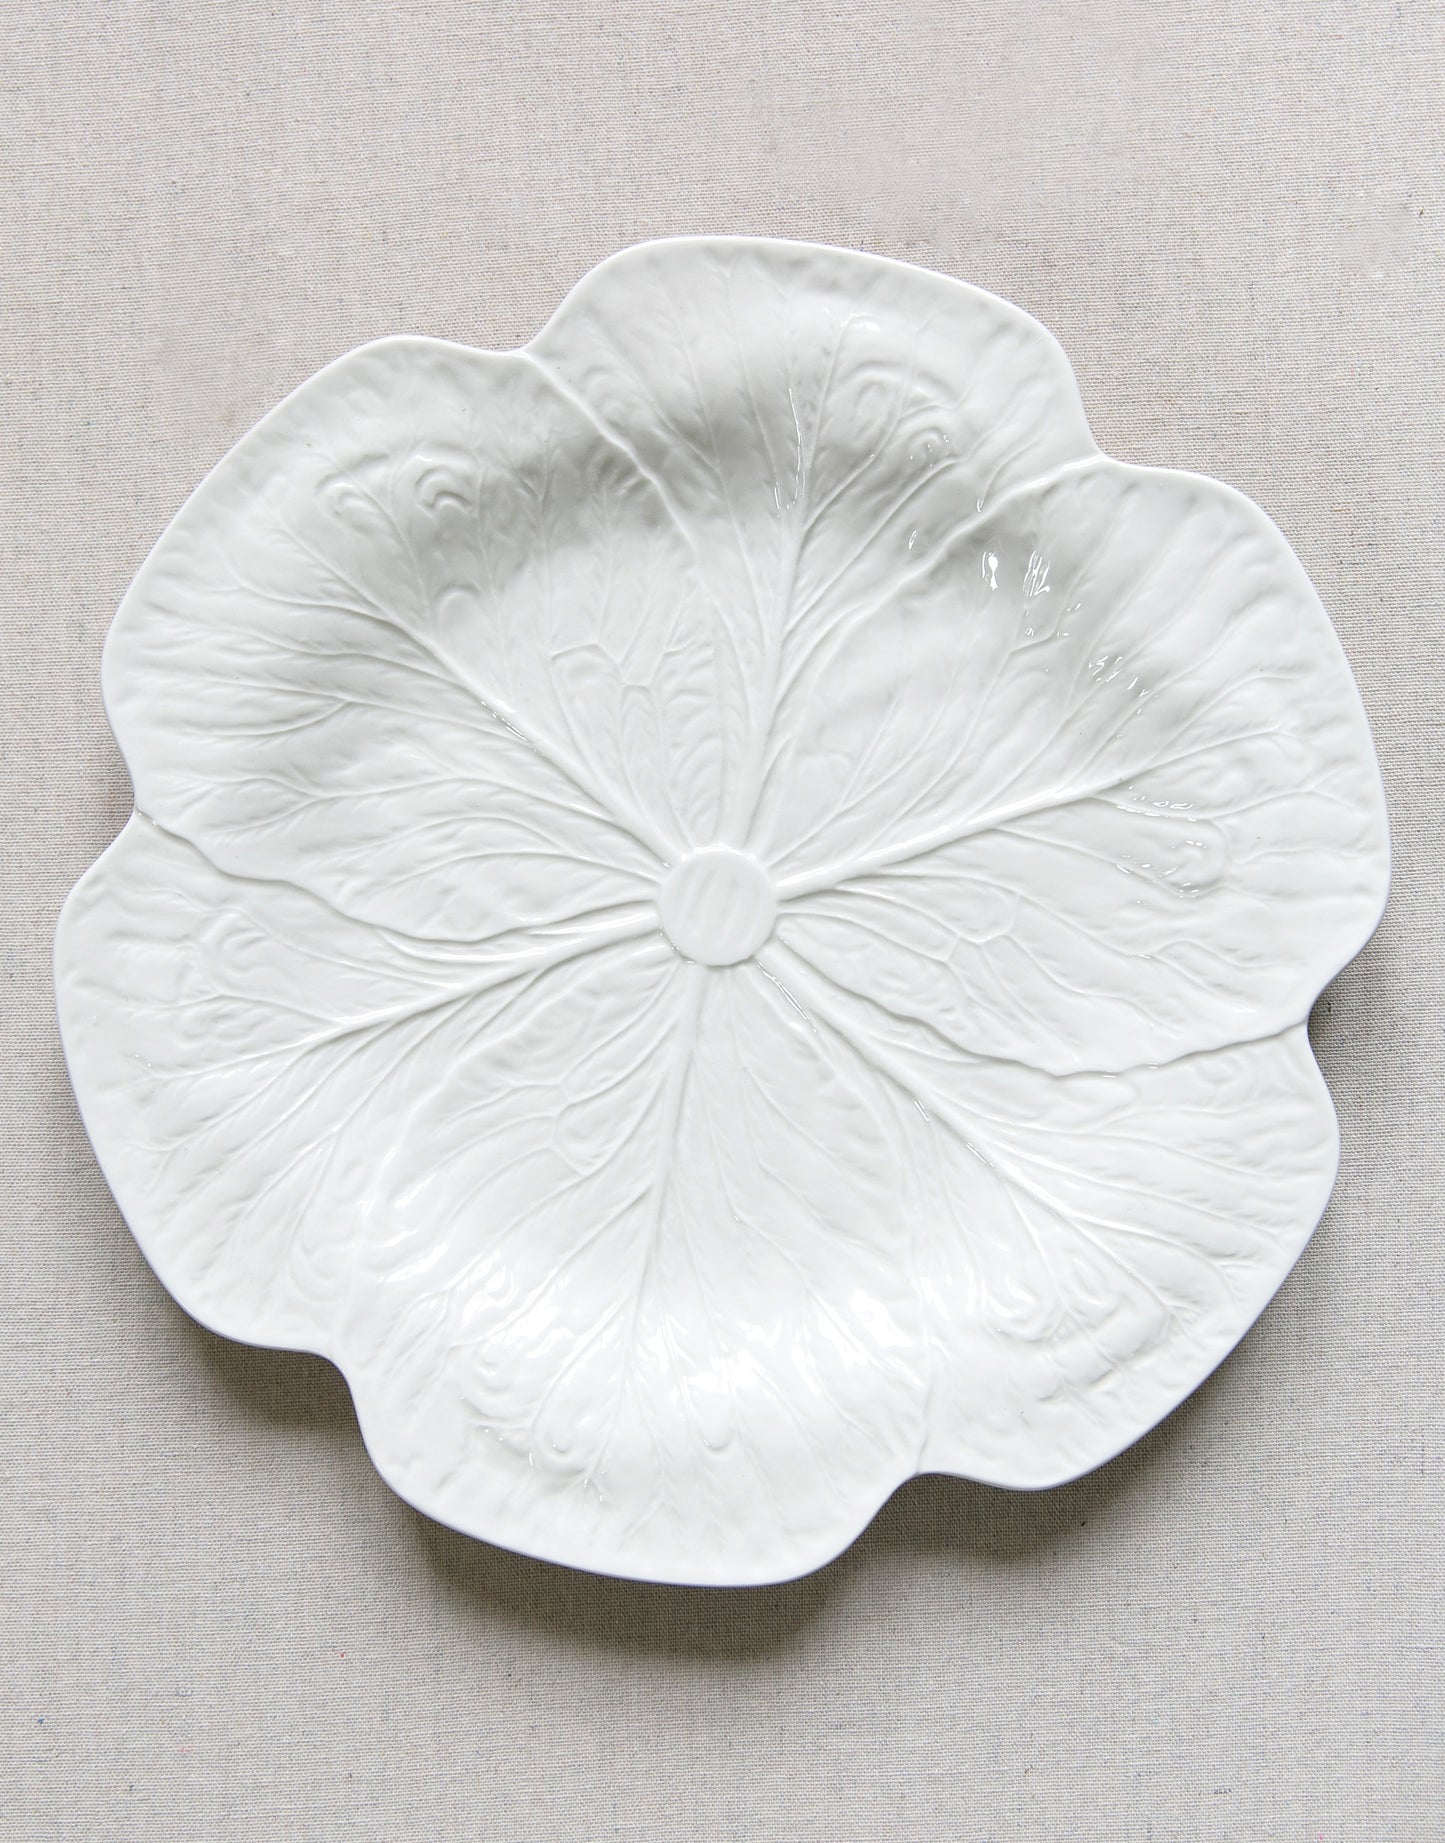 White Cabbage Plate set (SET OF 4)